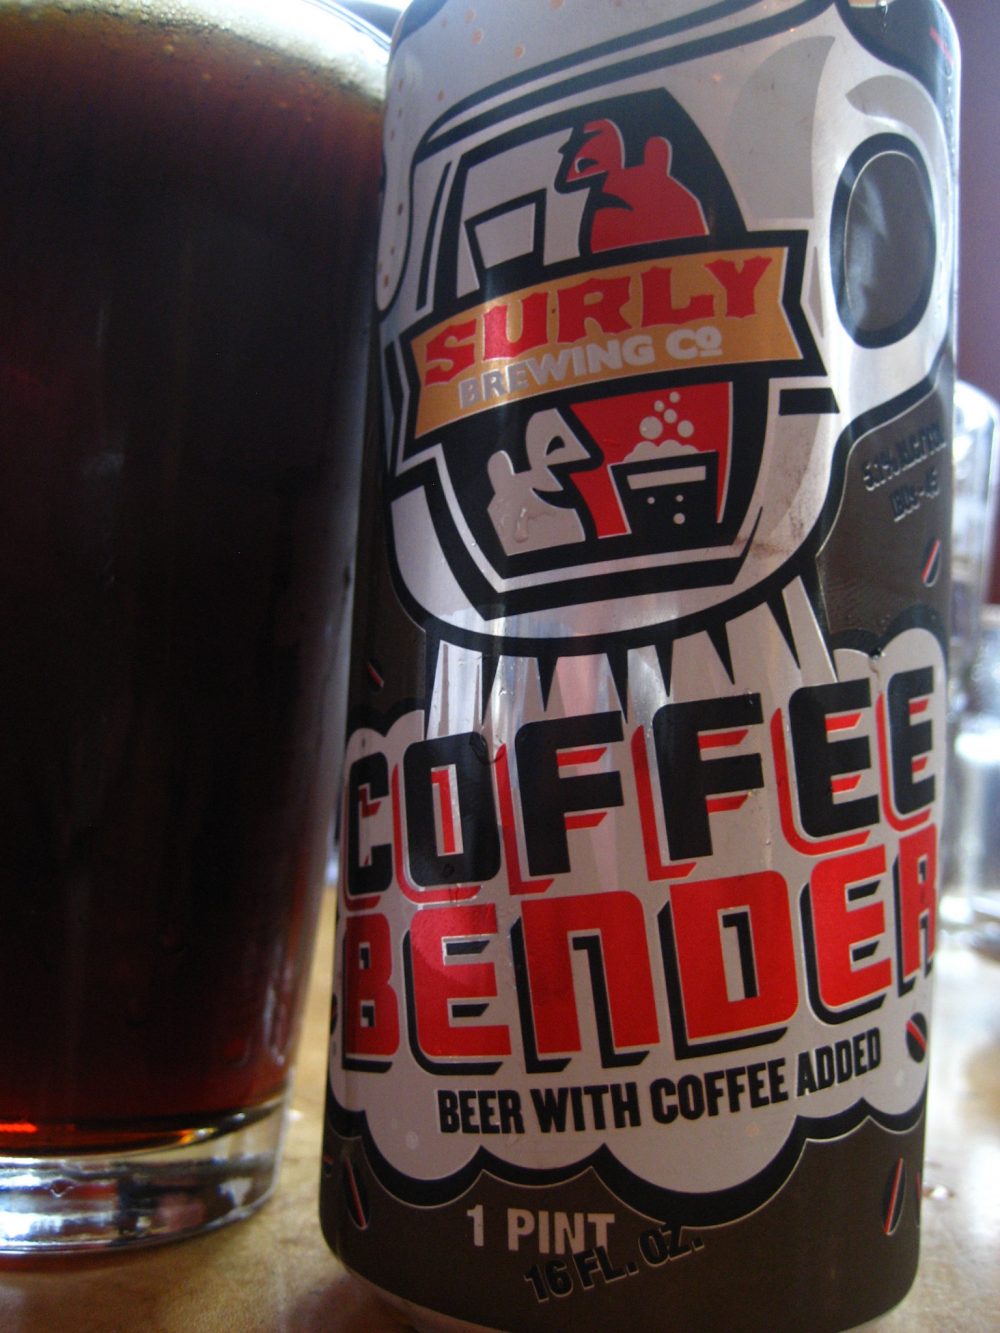 Surly's Coffee Bender